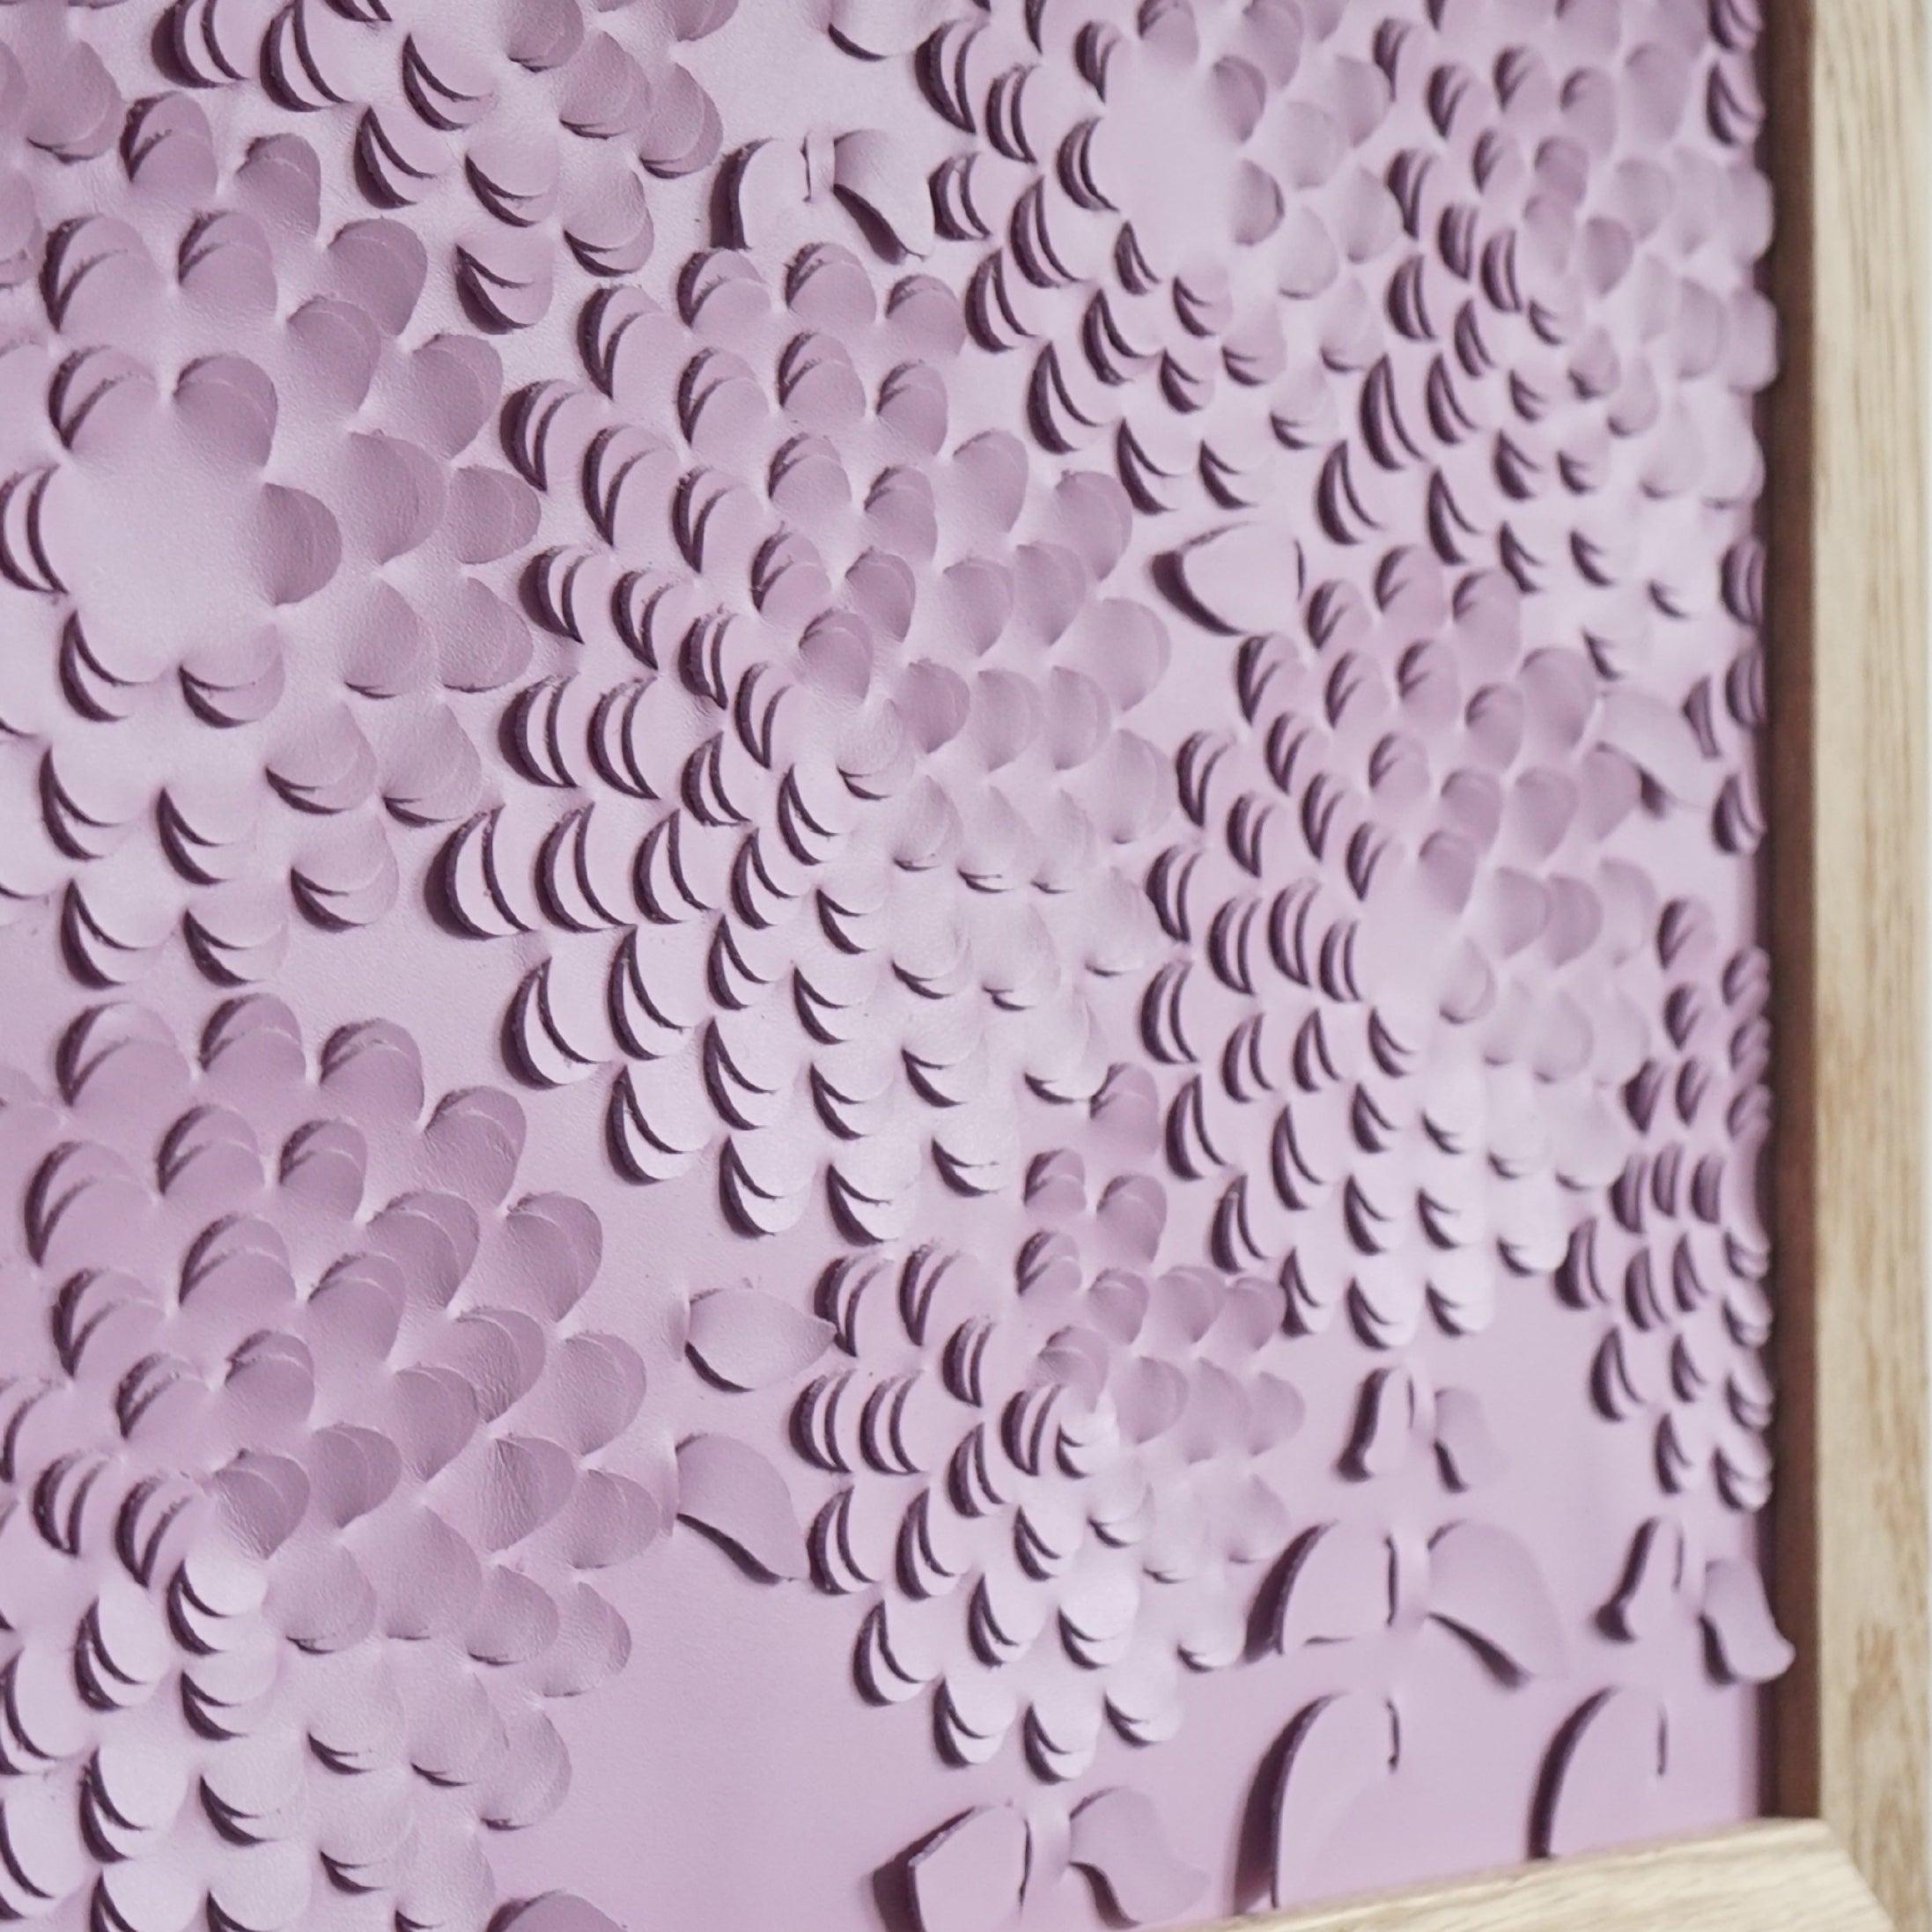 Chrysanthemum a Piece of 3D Sculptural Pink Leather Wall Art In New Condition For Sale In Margate, GB